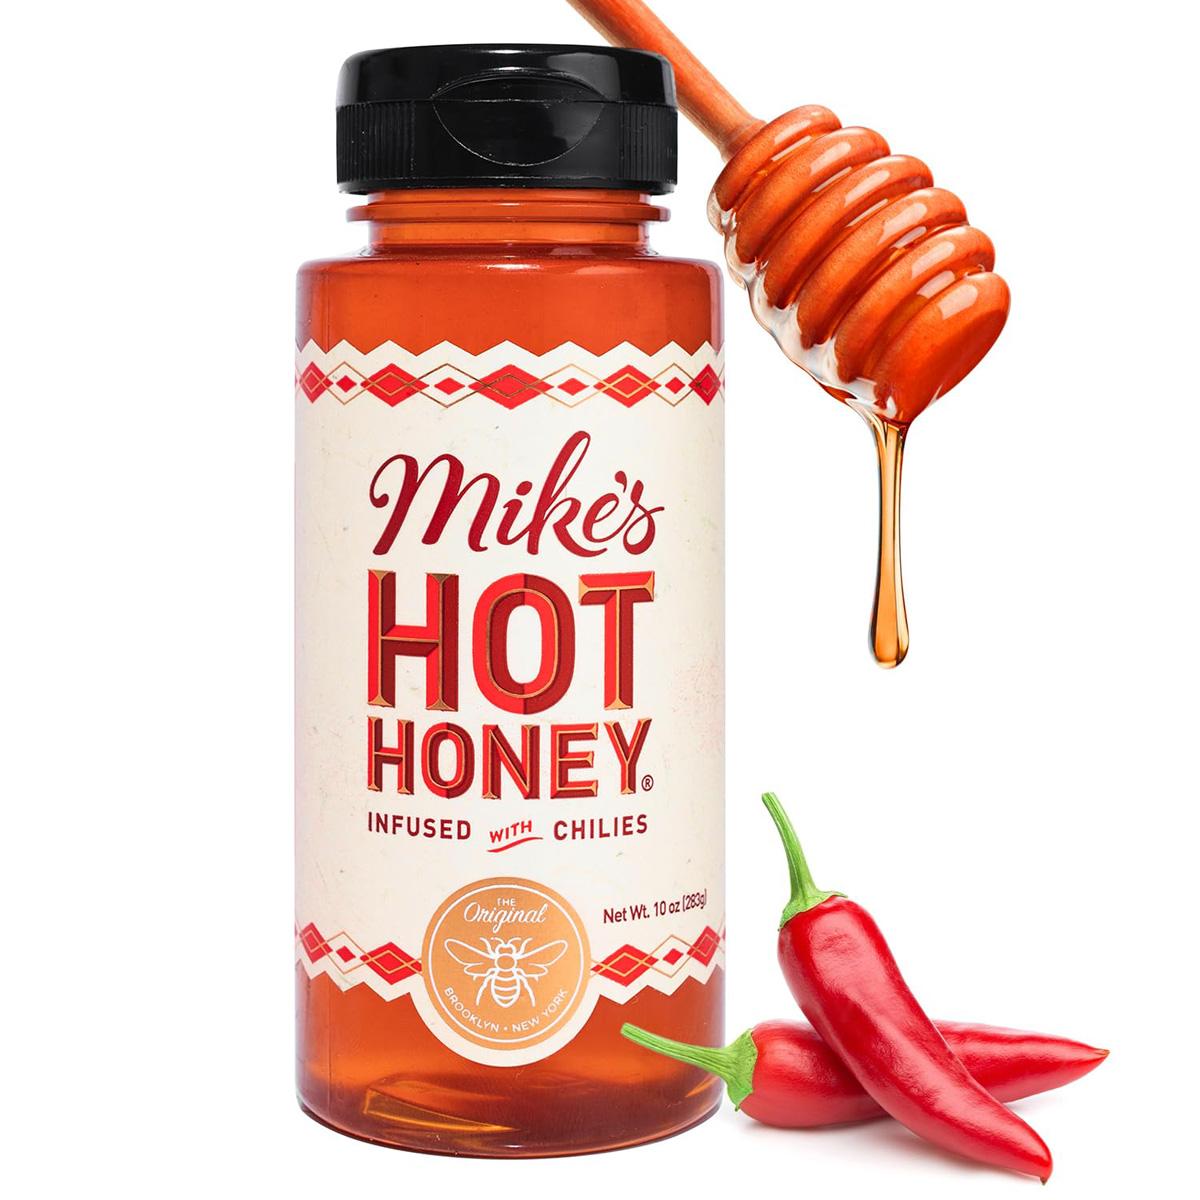 Mikes Hot Honey Infused with Chilies 10oz Bottle for $6.23 Shipped